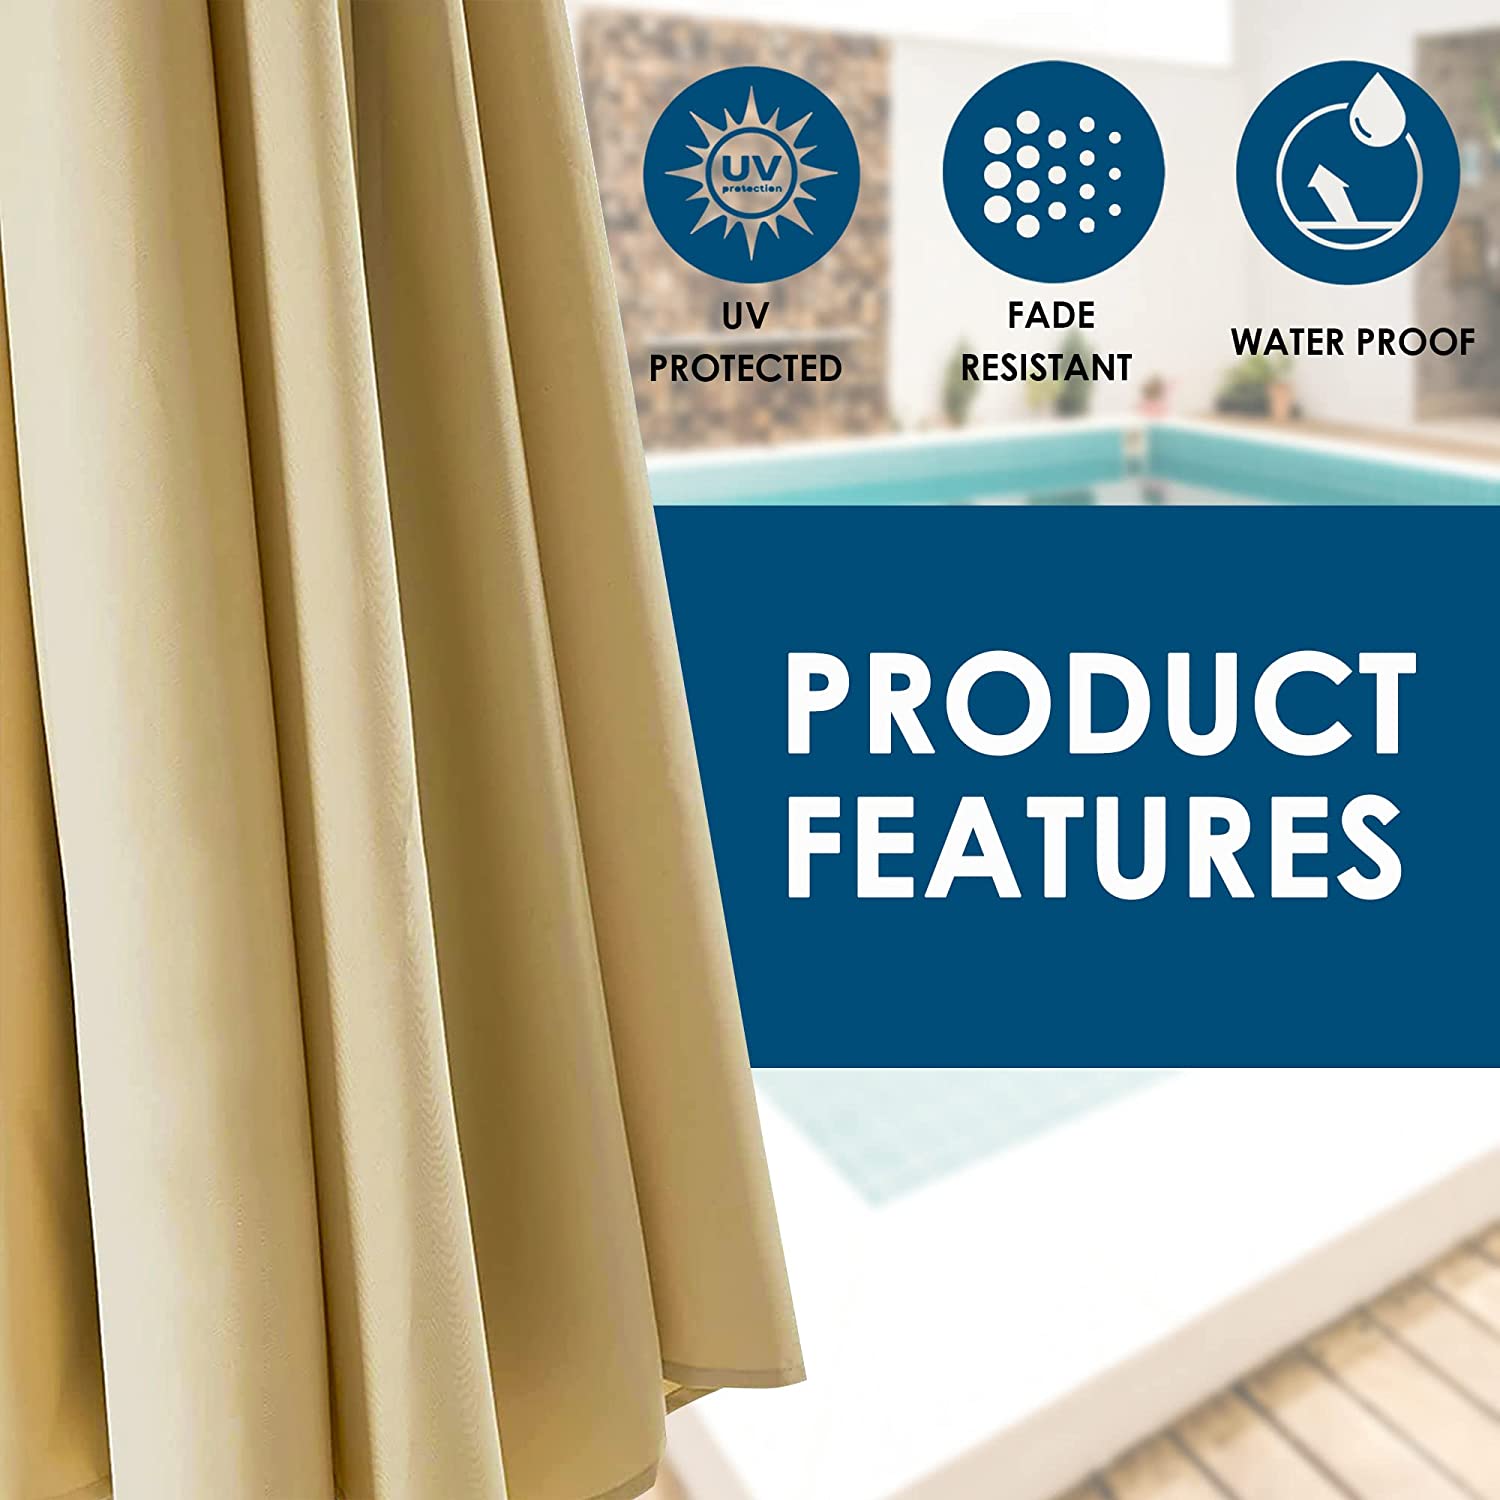 Product features of the West Kent 3m Patio umbrella which is UV protected, fade resistant and waterproof